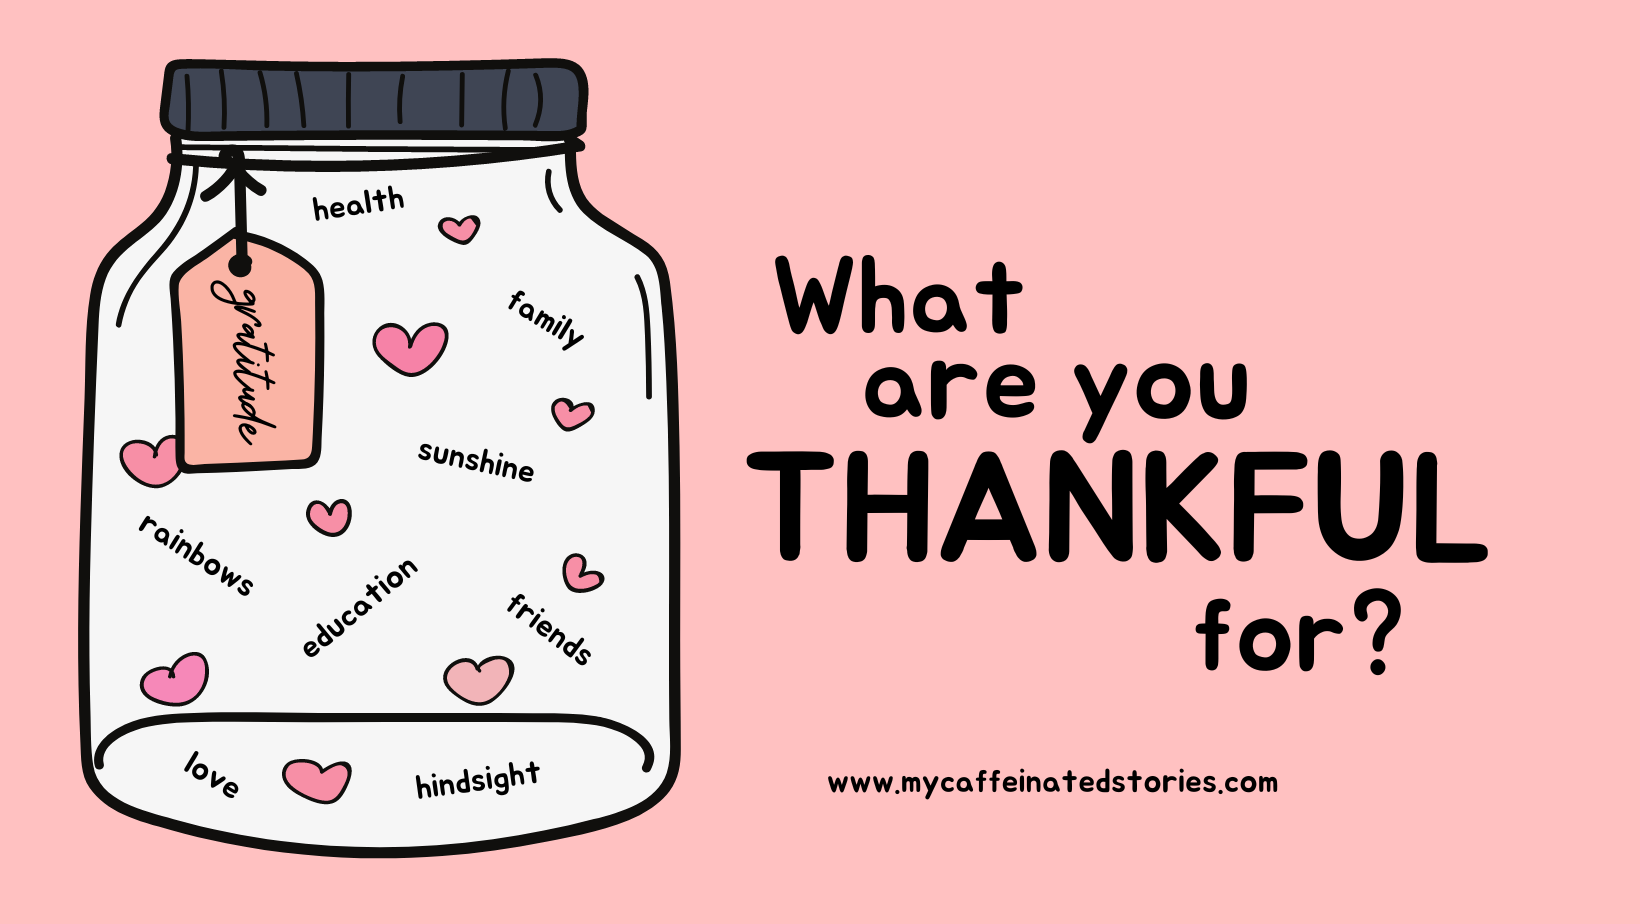 On cultivating gratitude without toxic positivity